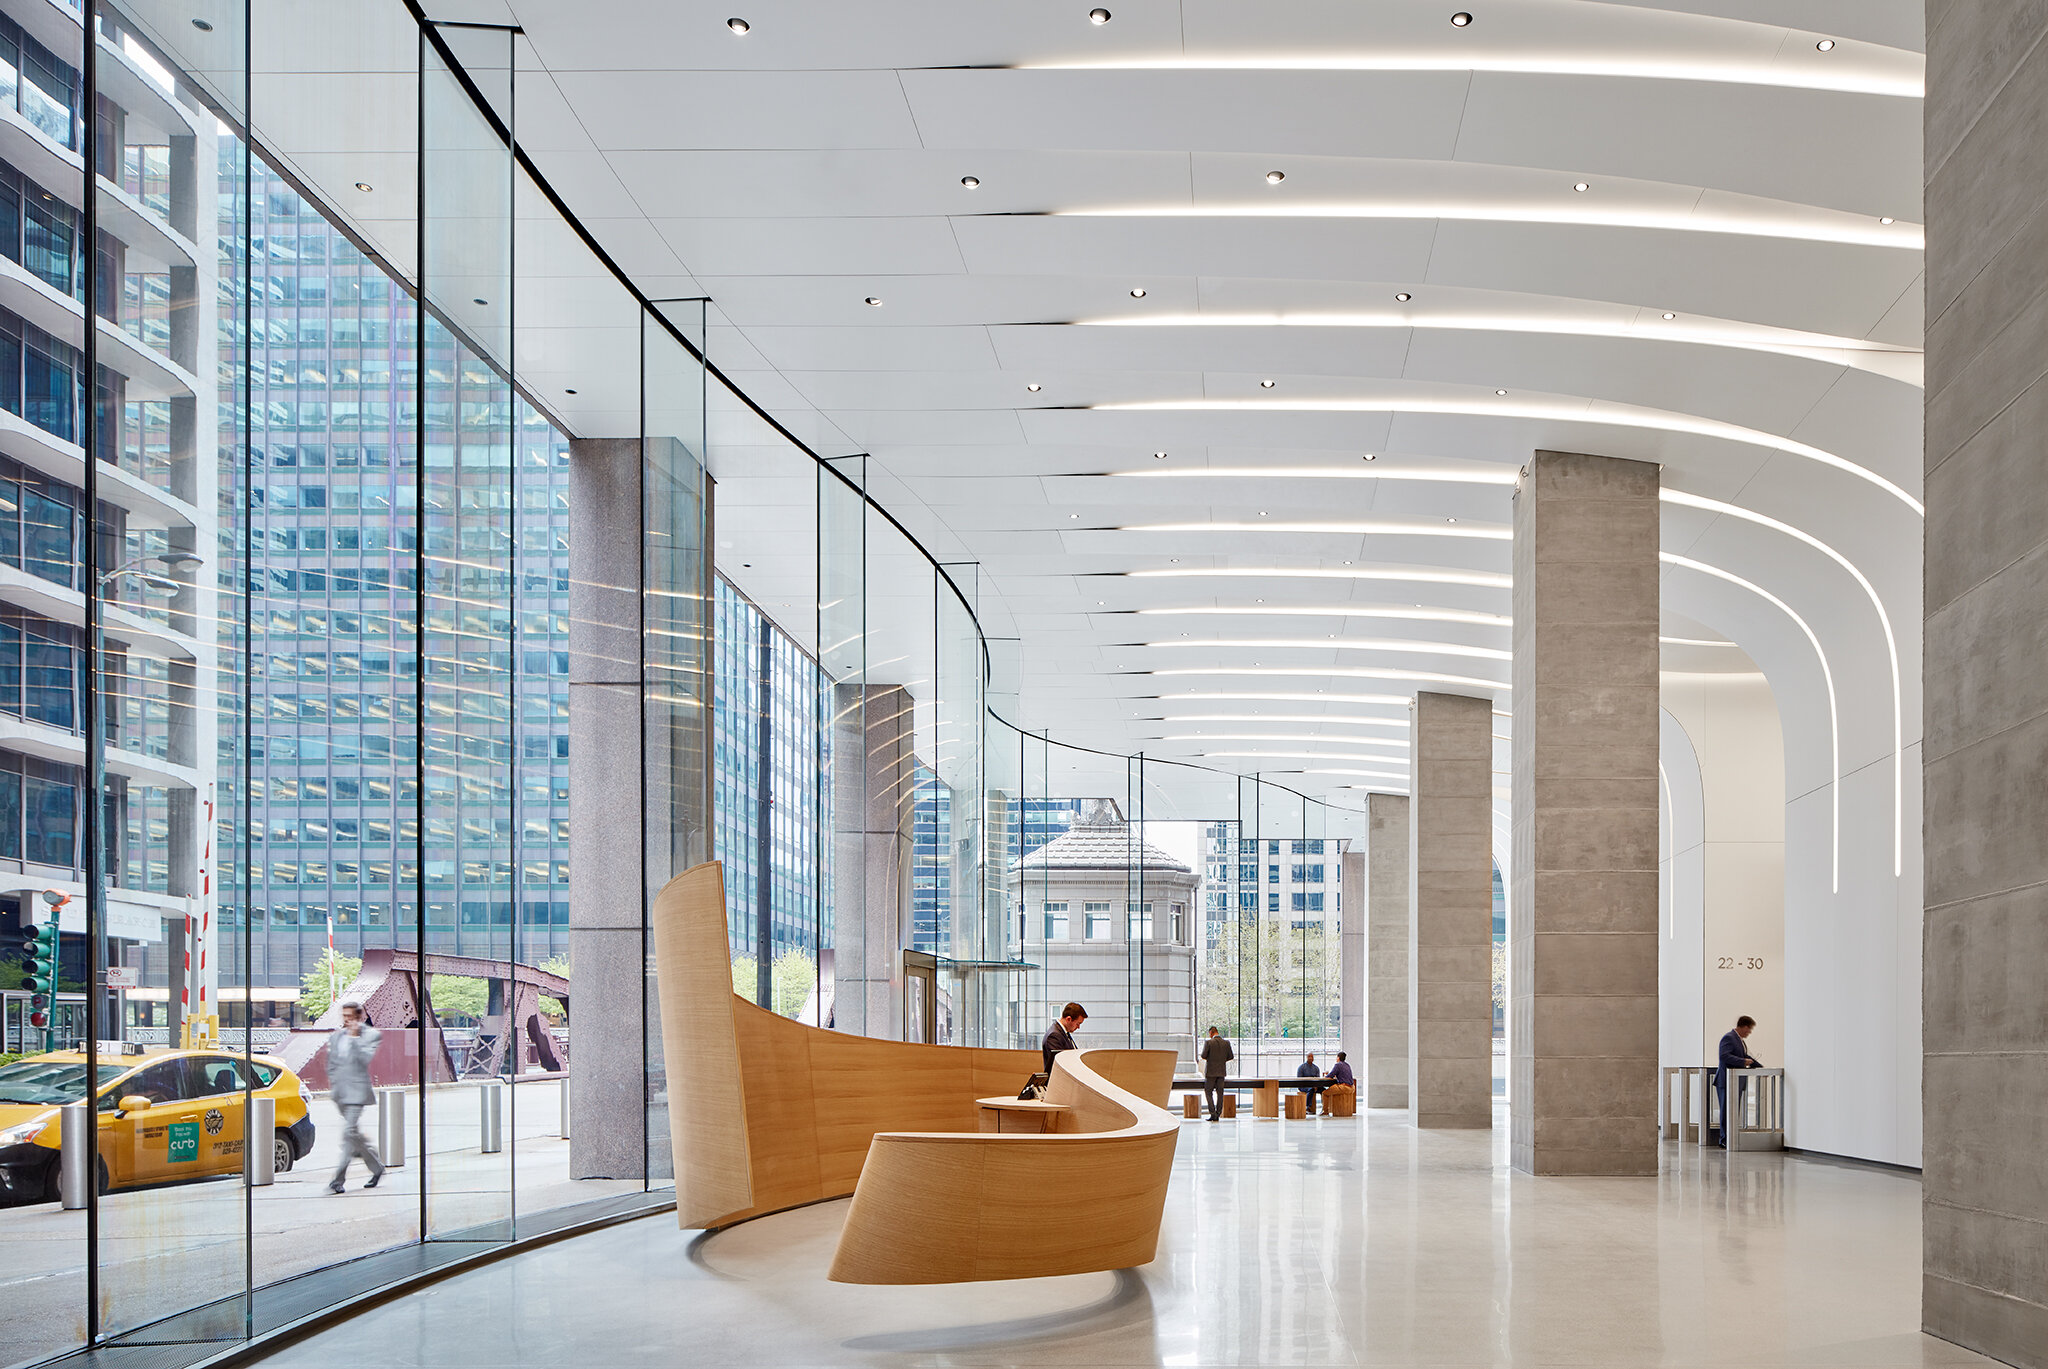  AWARDS  Architect Newspaper Best of Design Award, Honorable Mention, Interior/ Office, 2021    CME Center  Krueck+Sexton Partners  Chicago, IL     View Project  